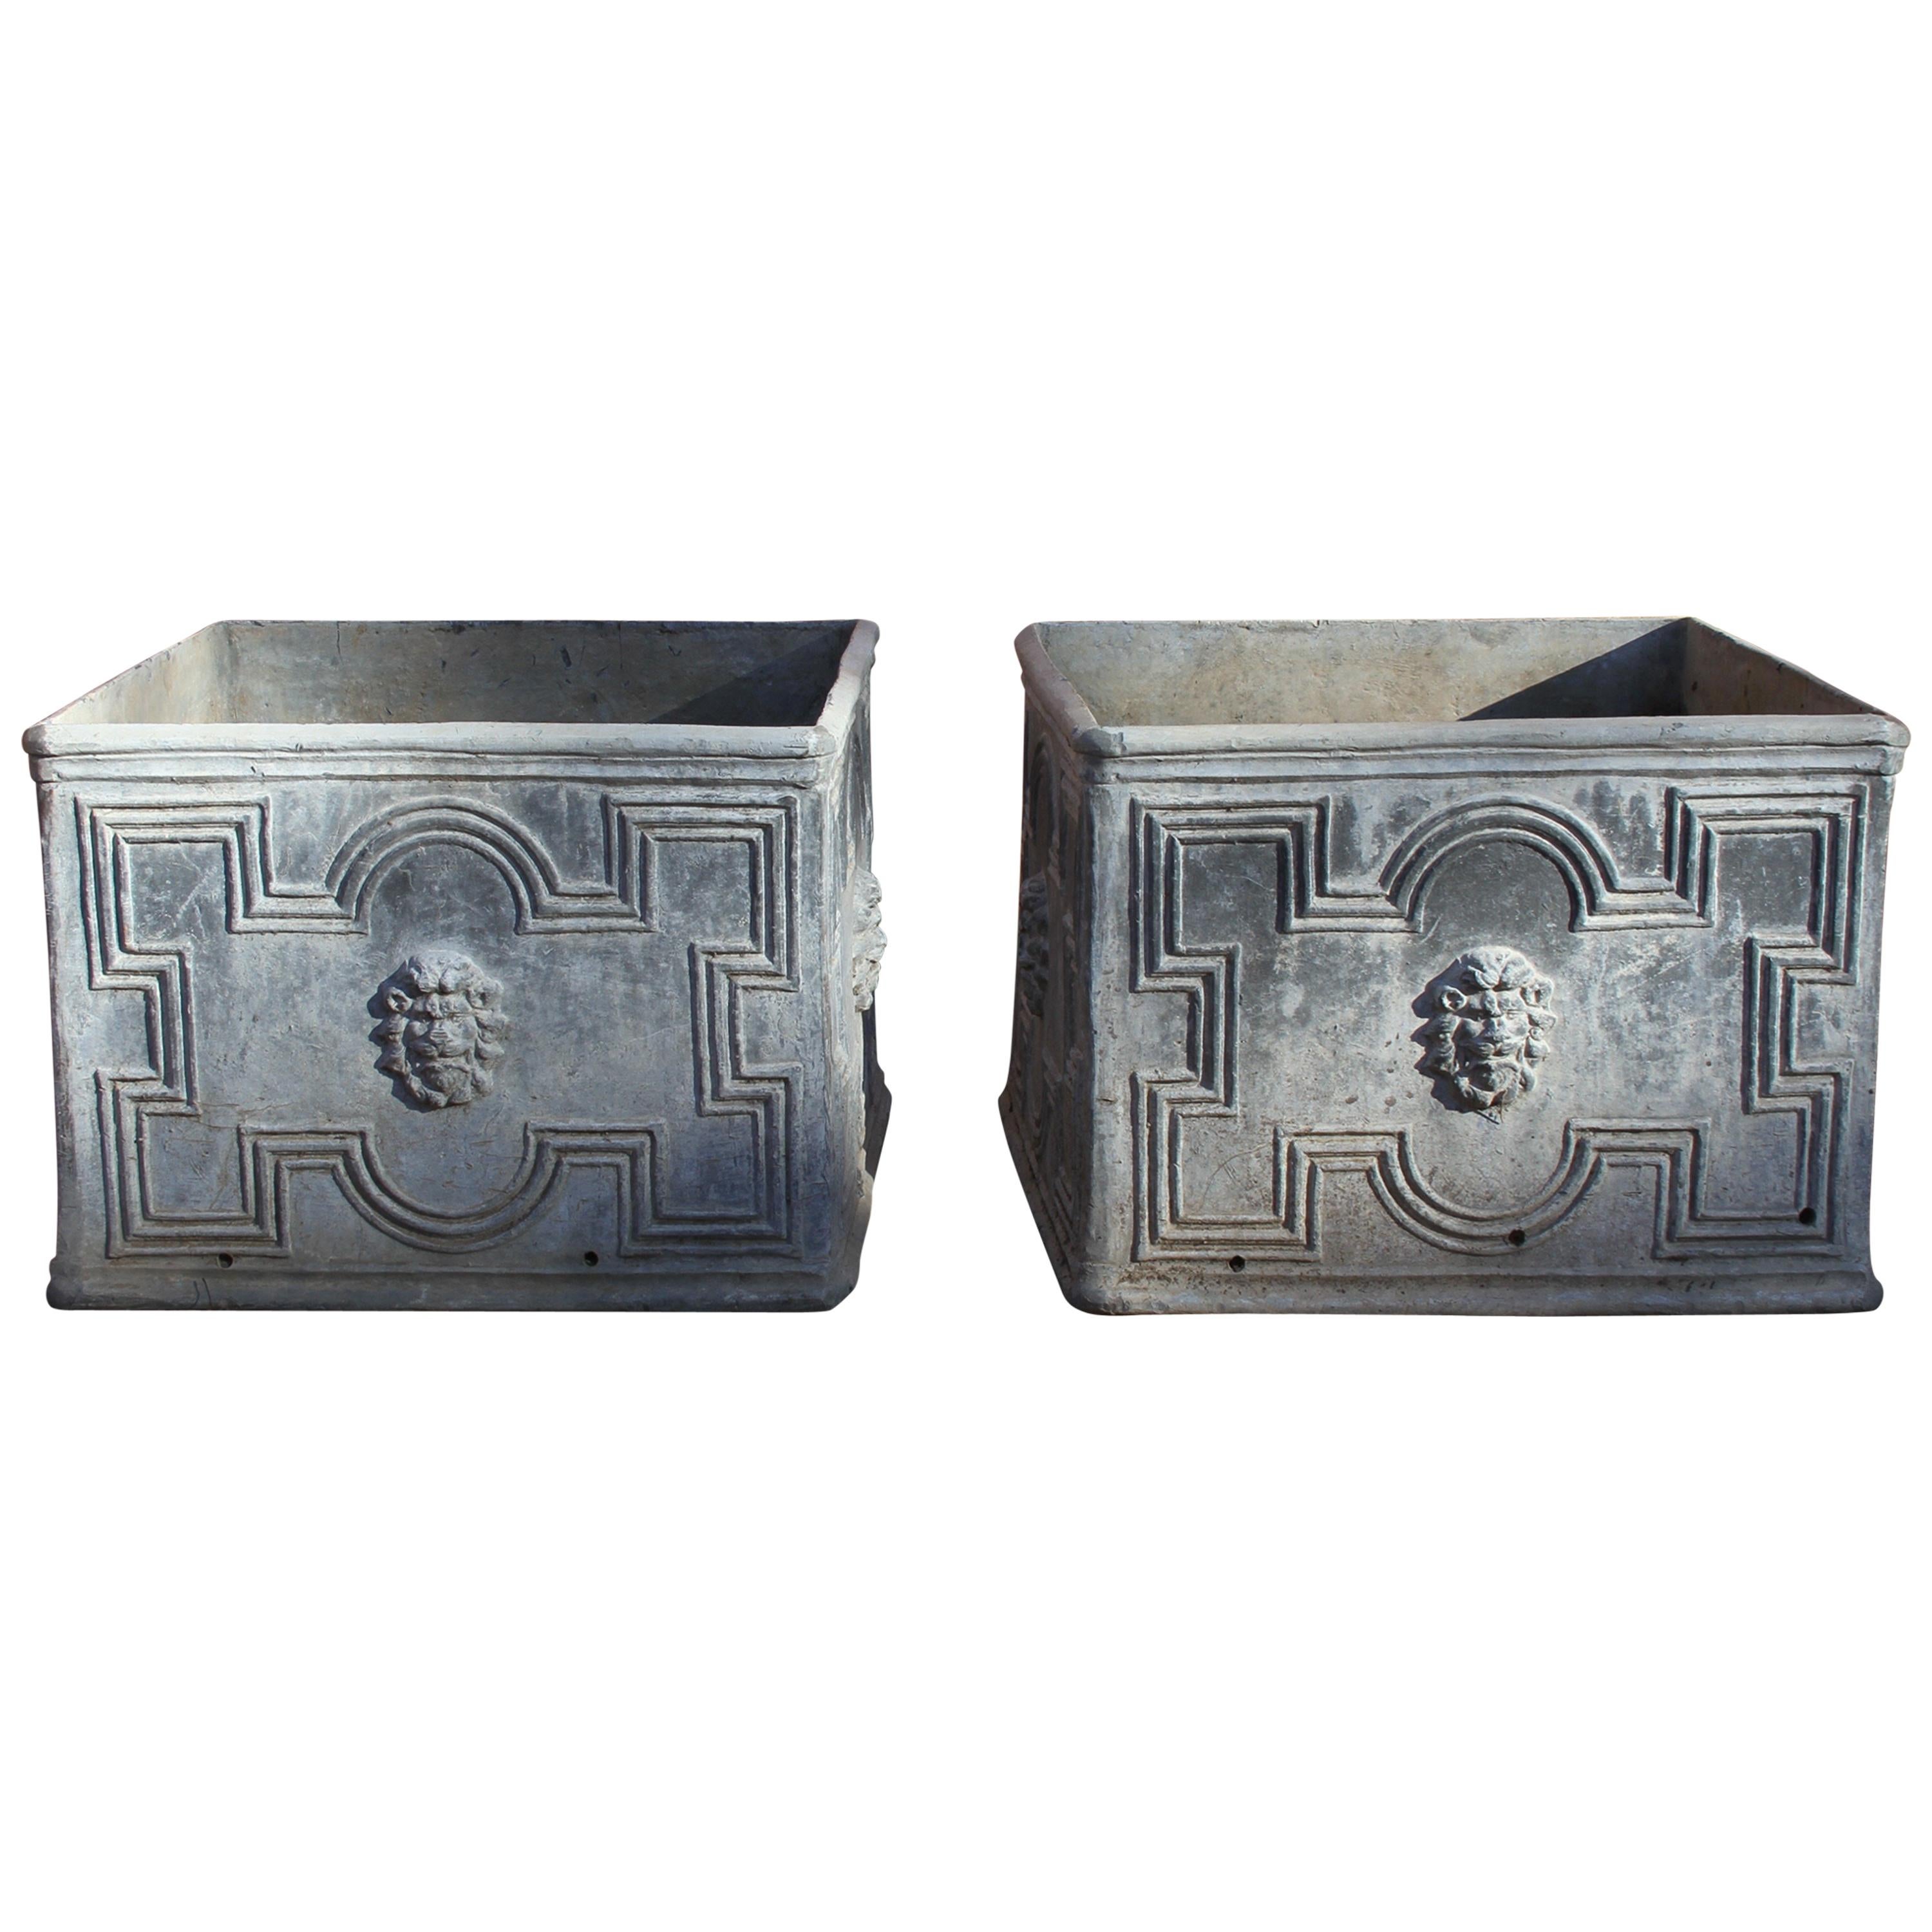 Pair of Square Antique English Lead Jardinieres with Lion Heads Planter Boxes 